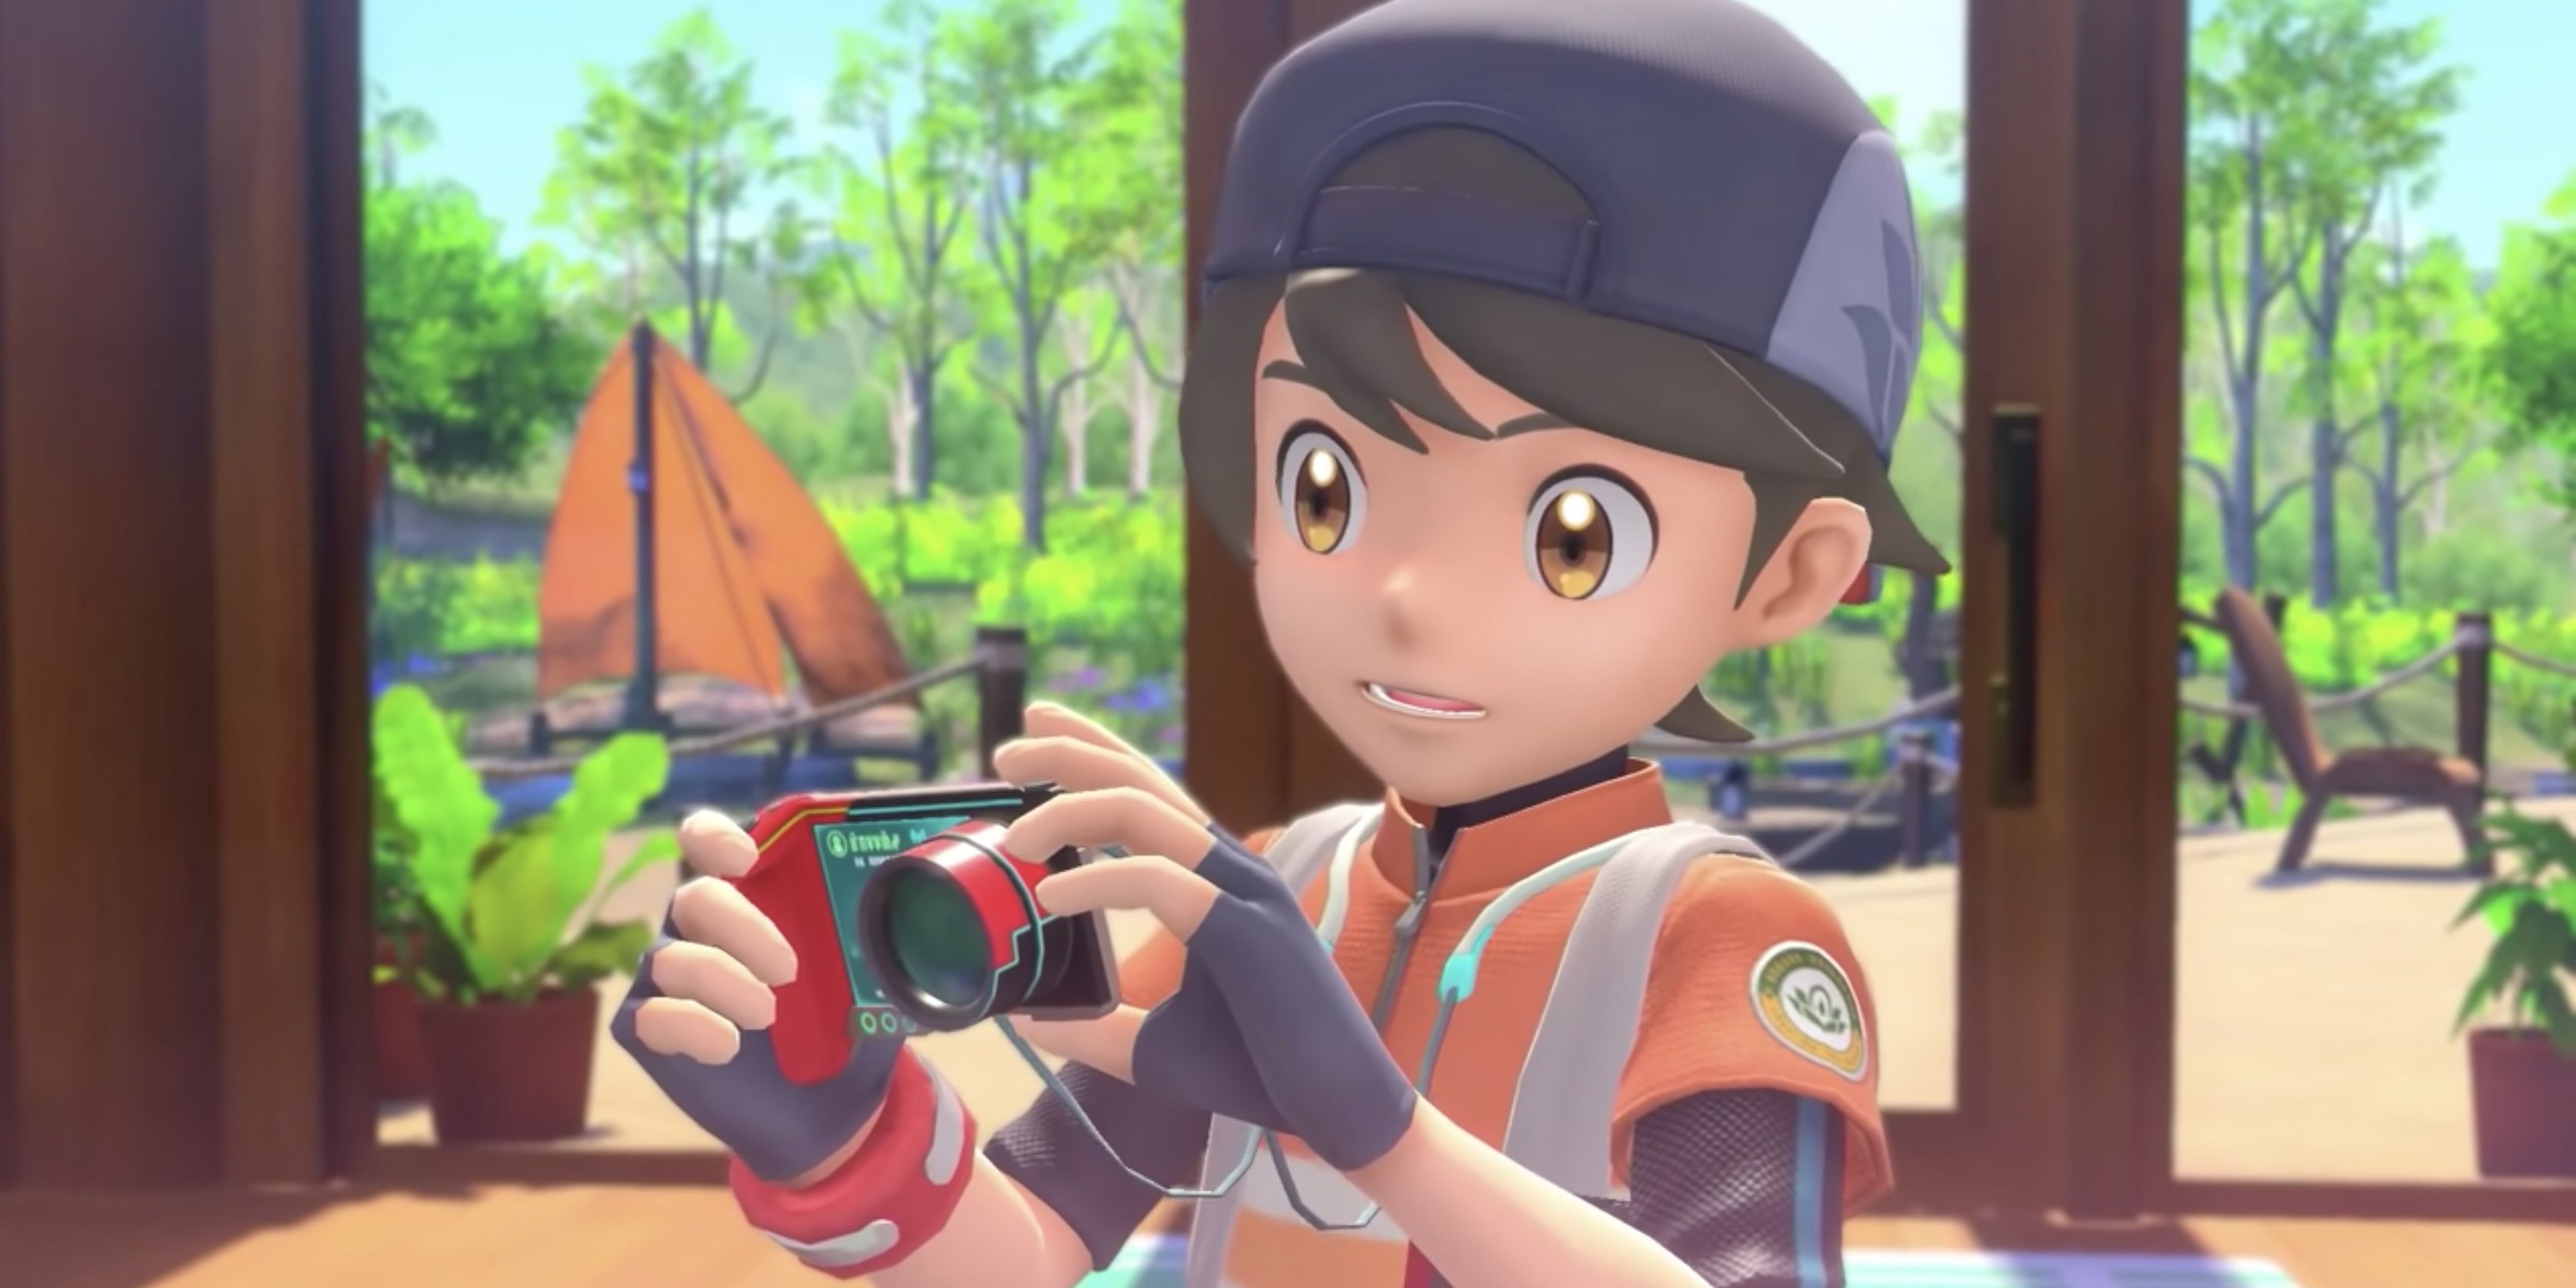 The player earning their camera in New Pokemon Snap